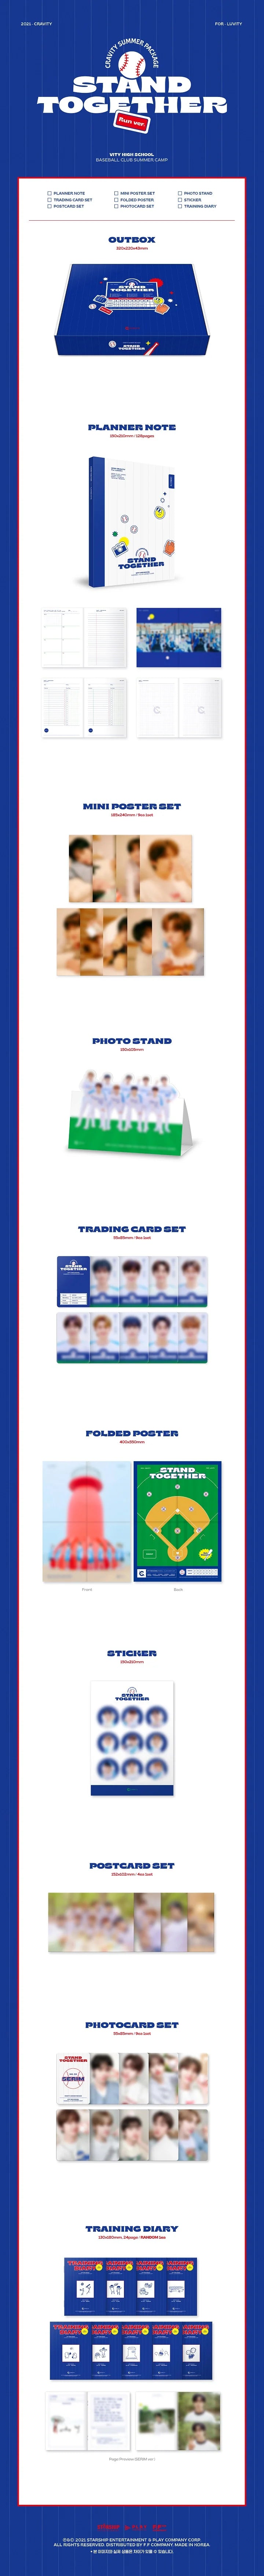 CRAVITY Summer Package 2021 Stand Together Run Version